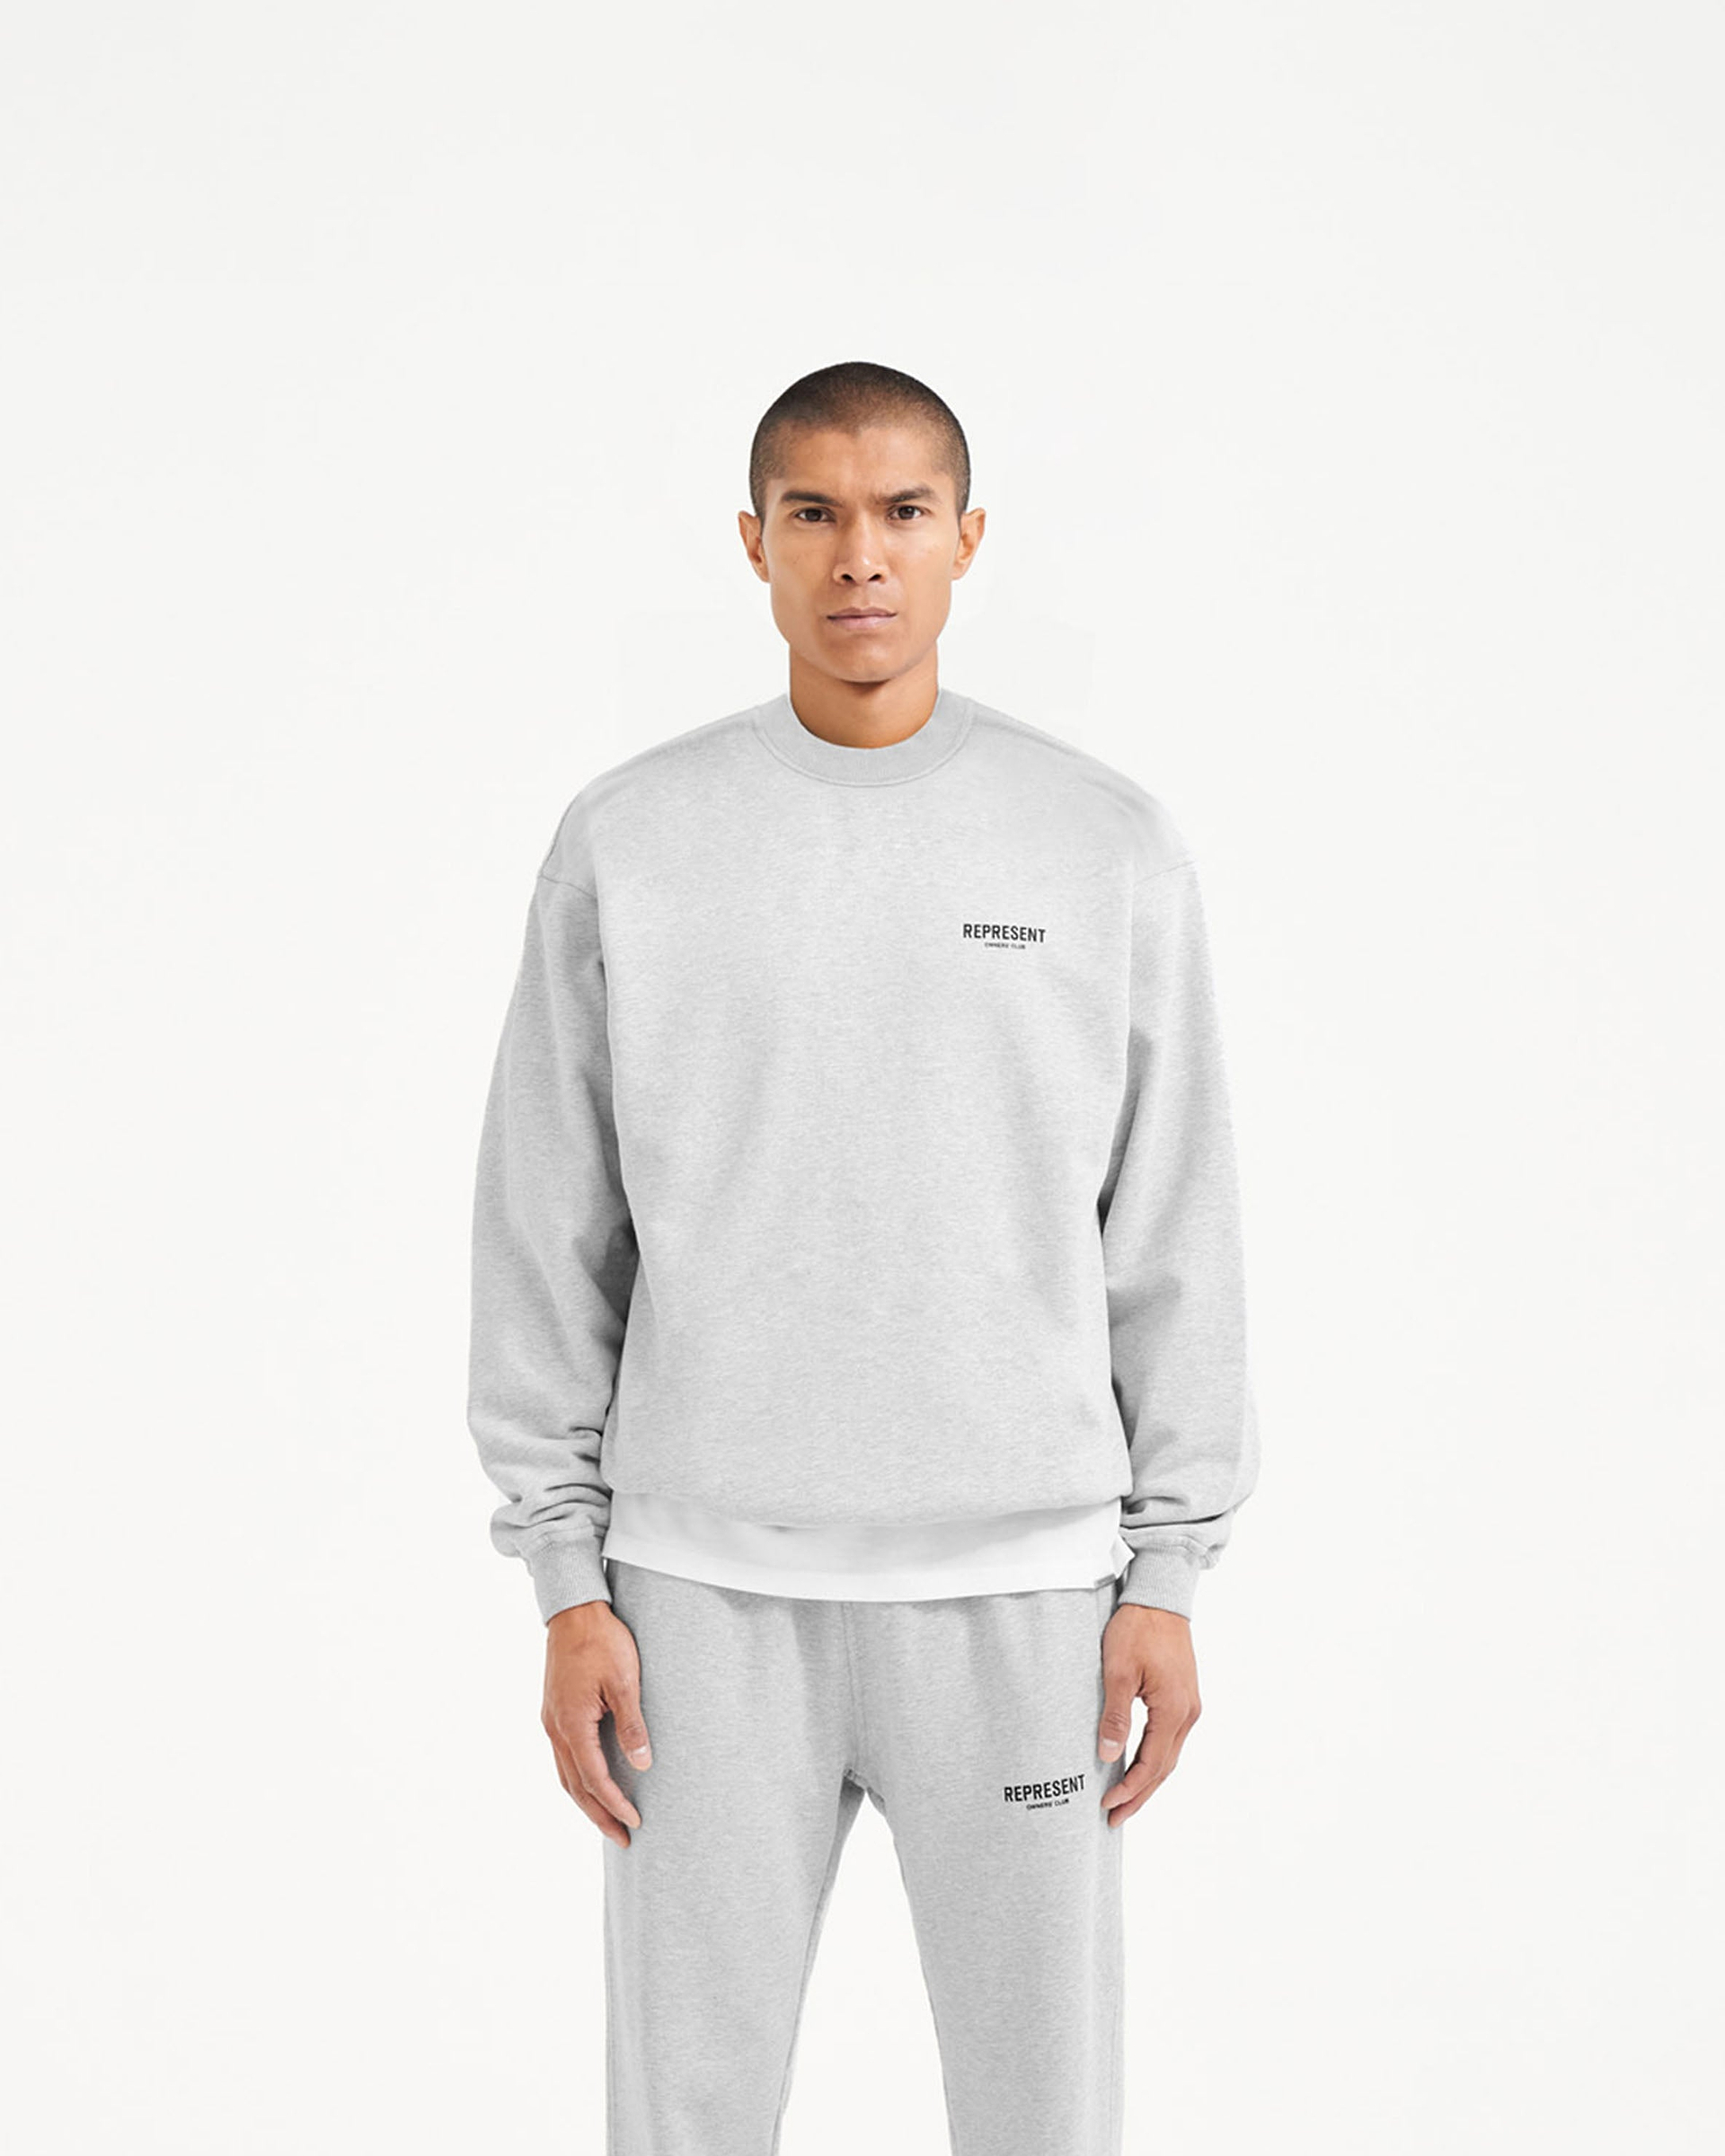 Represent Owners Club Sweater - Ash Grey